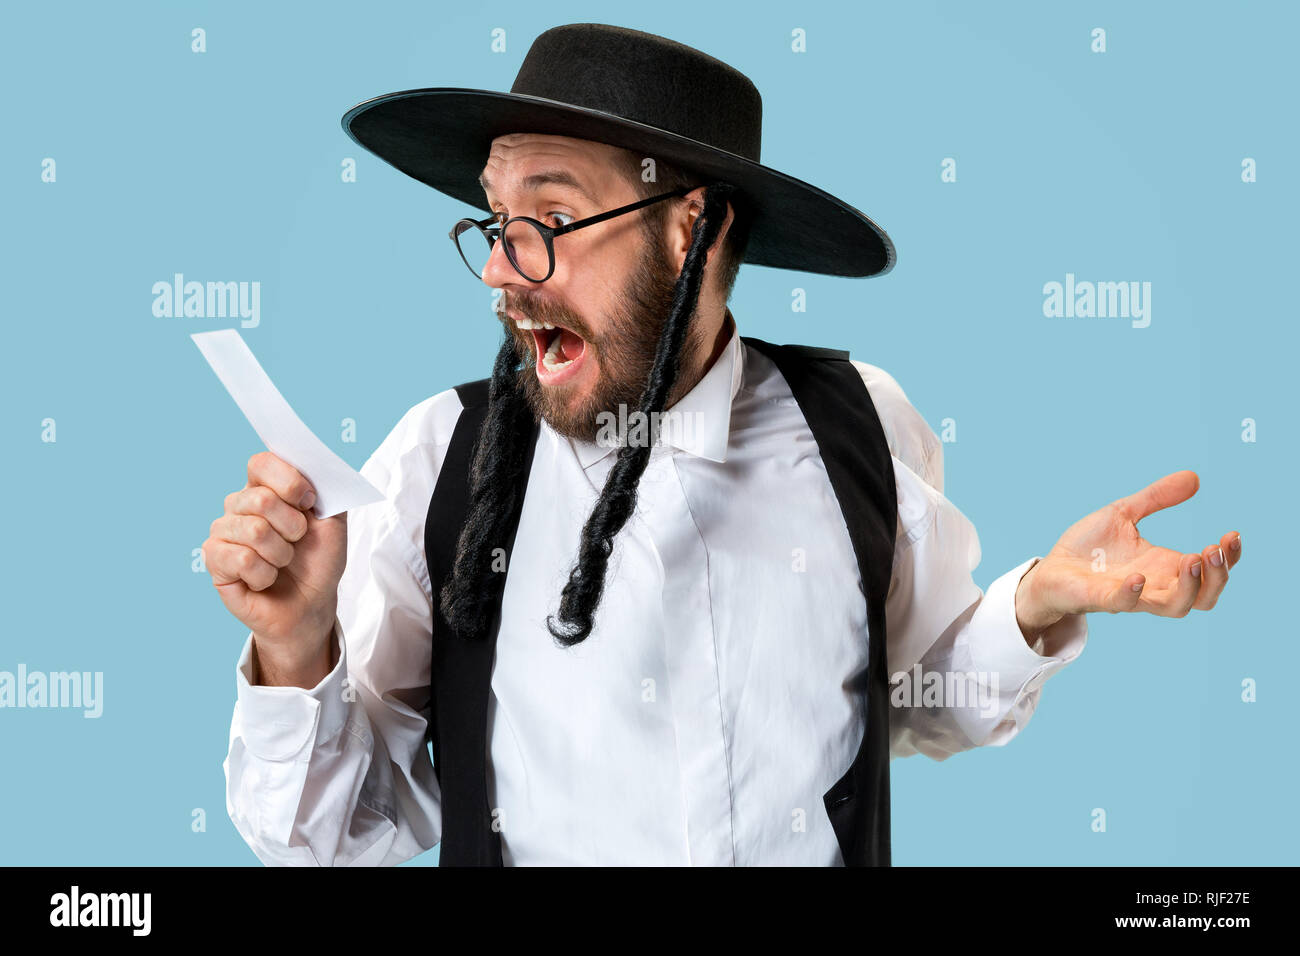 Portrait of a young orthodox Hasdim Jewish man with bet slip at studio. The holiday, celebration, judaism, bet, betting concept. Stock Photo